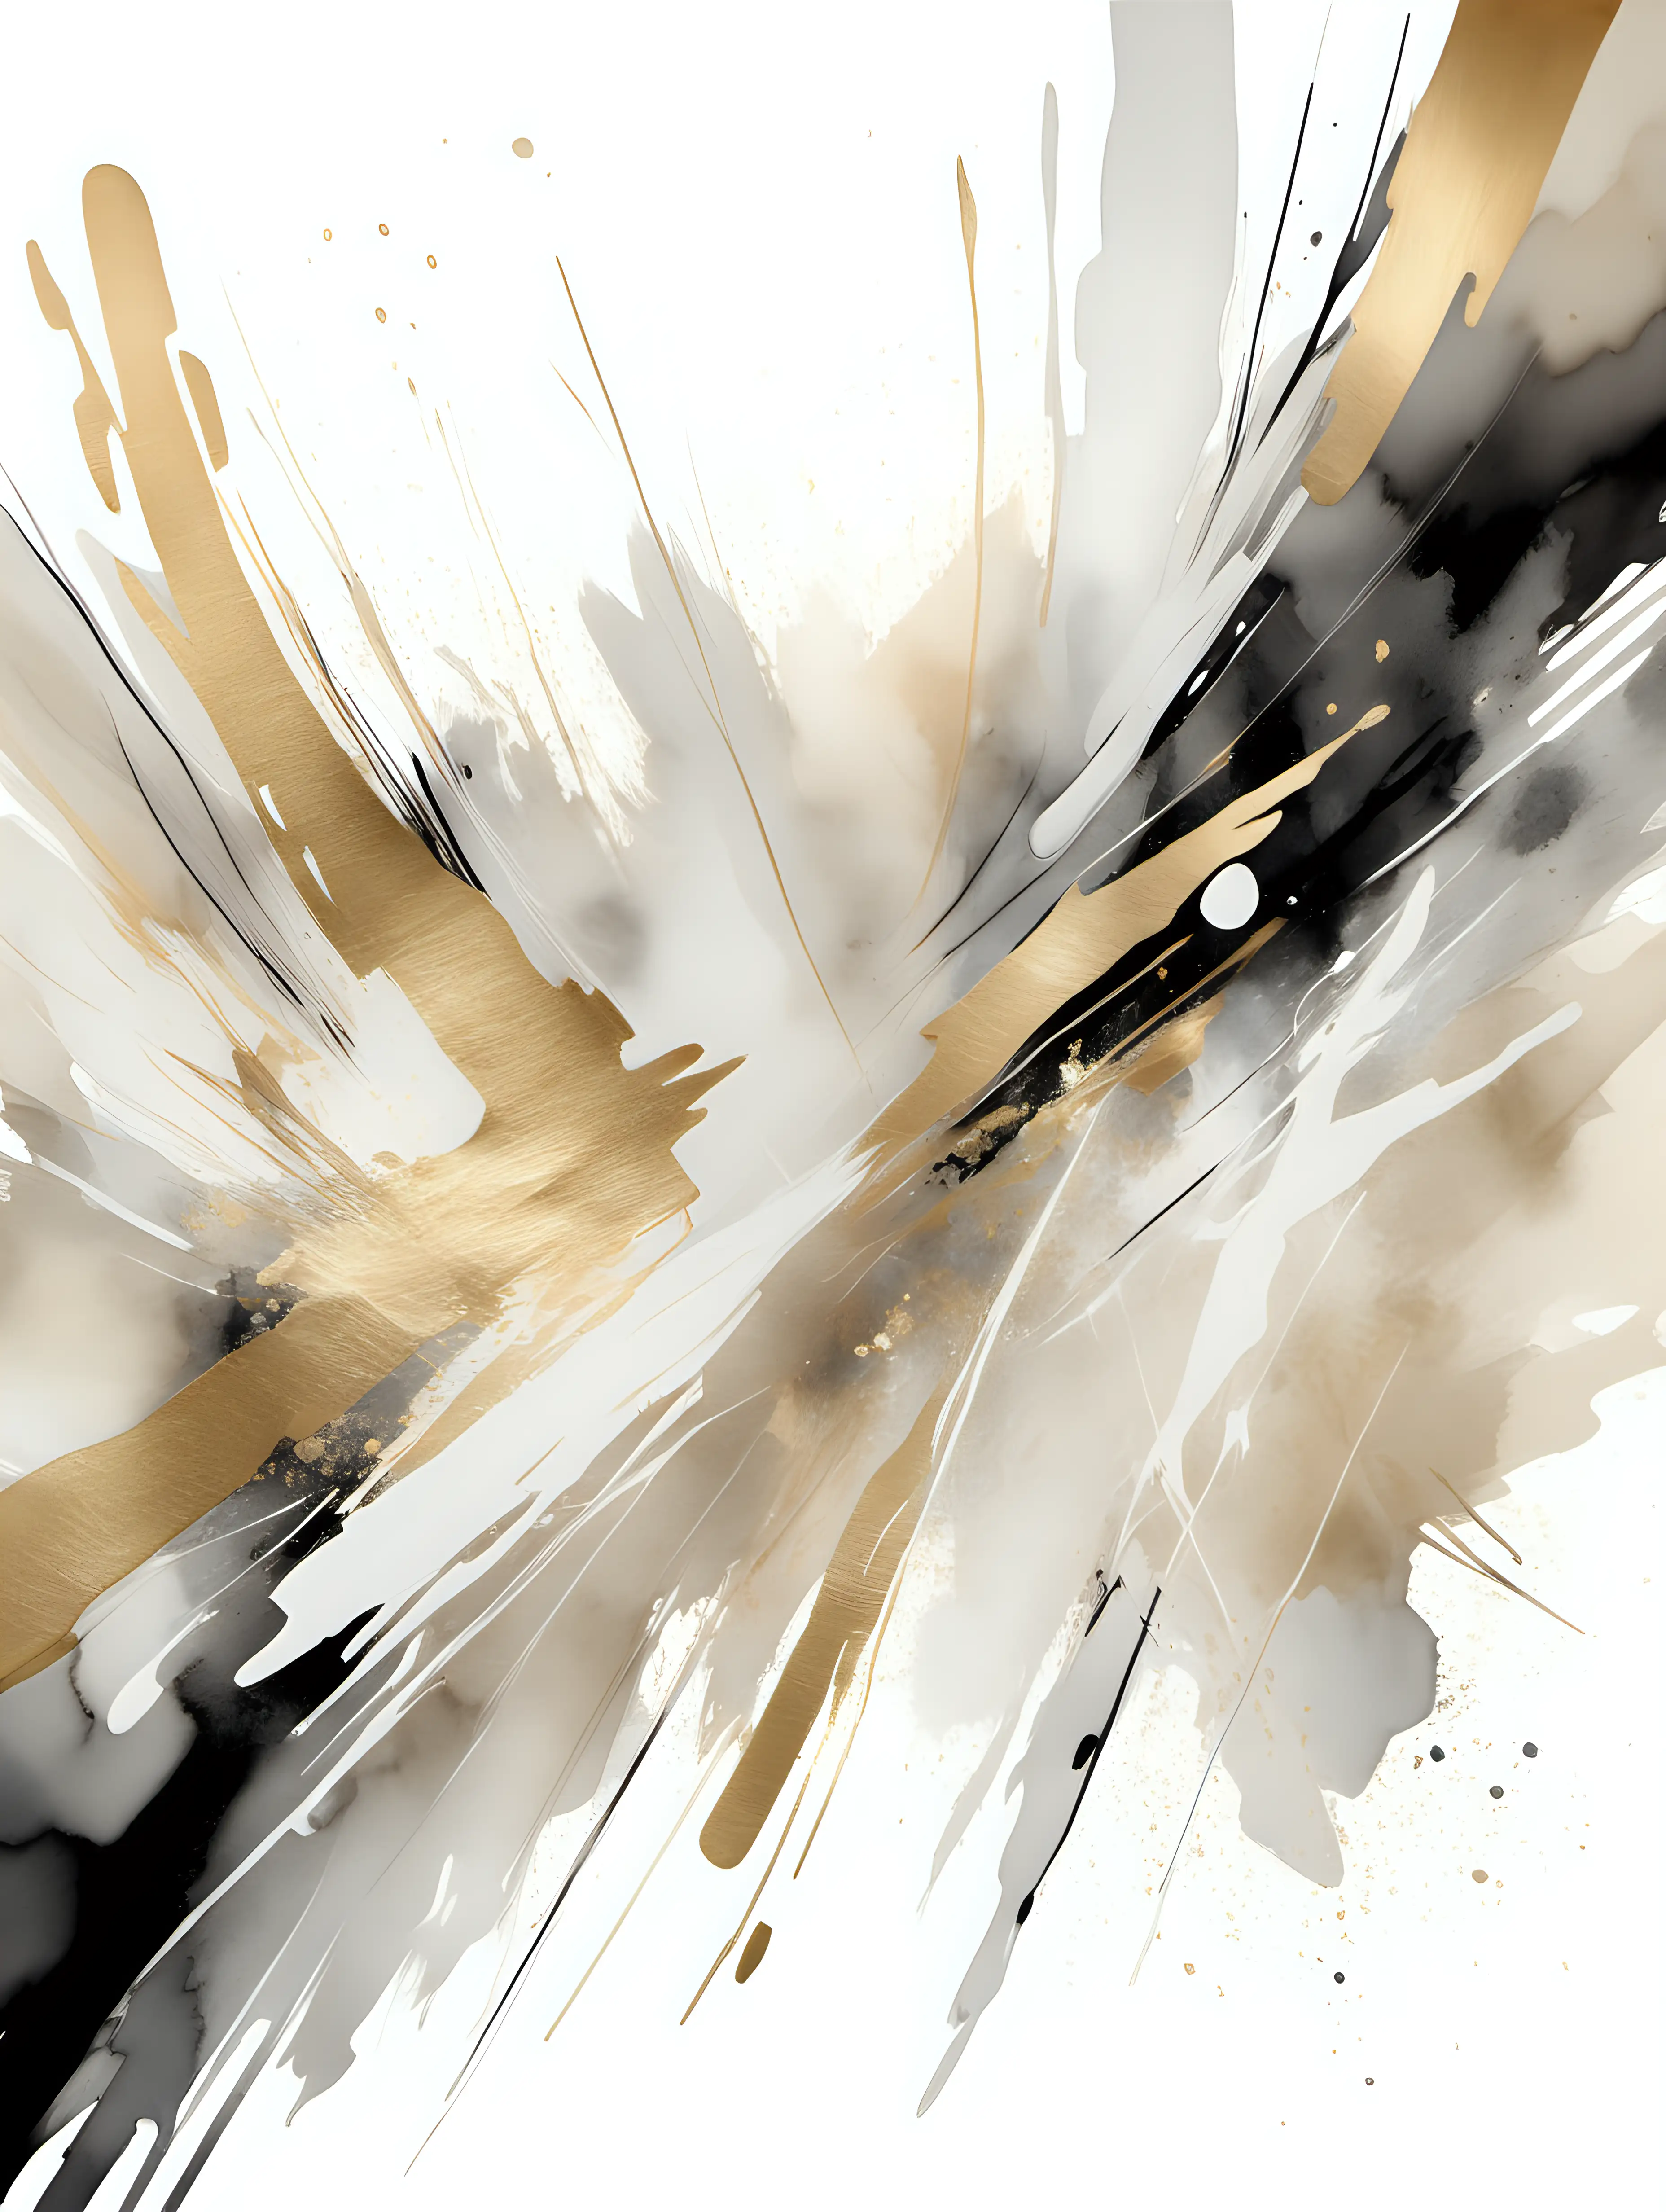 Large modern abstract image that incorporates light watercolours white, beige, gold and black in horizontal and vertical brush strokes only. Nortic design